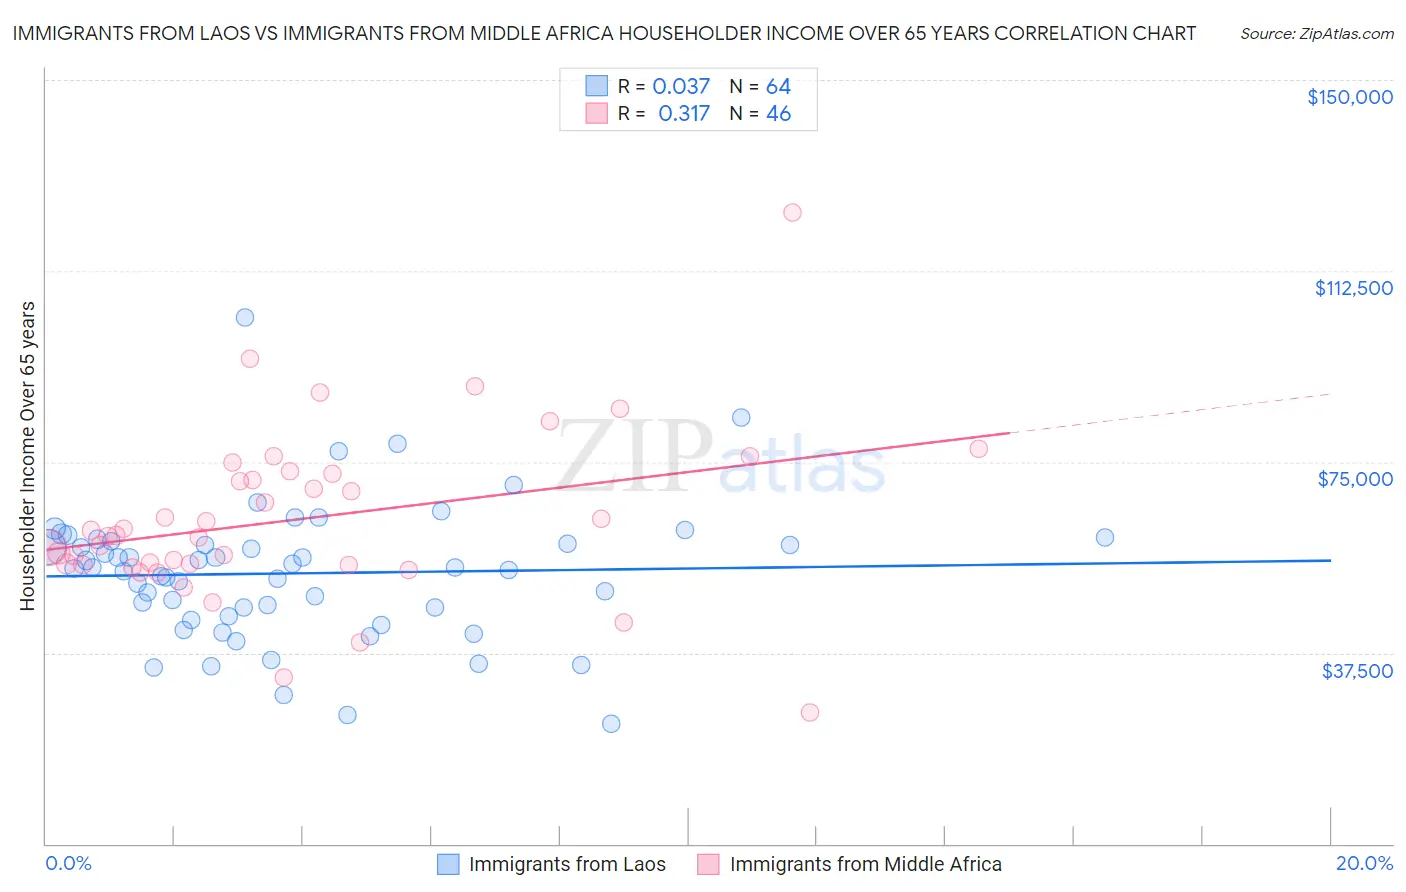 Immigrants from Laos vs Immigrants from Middle Africa Householder Income Over 65 years